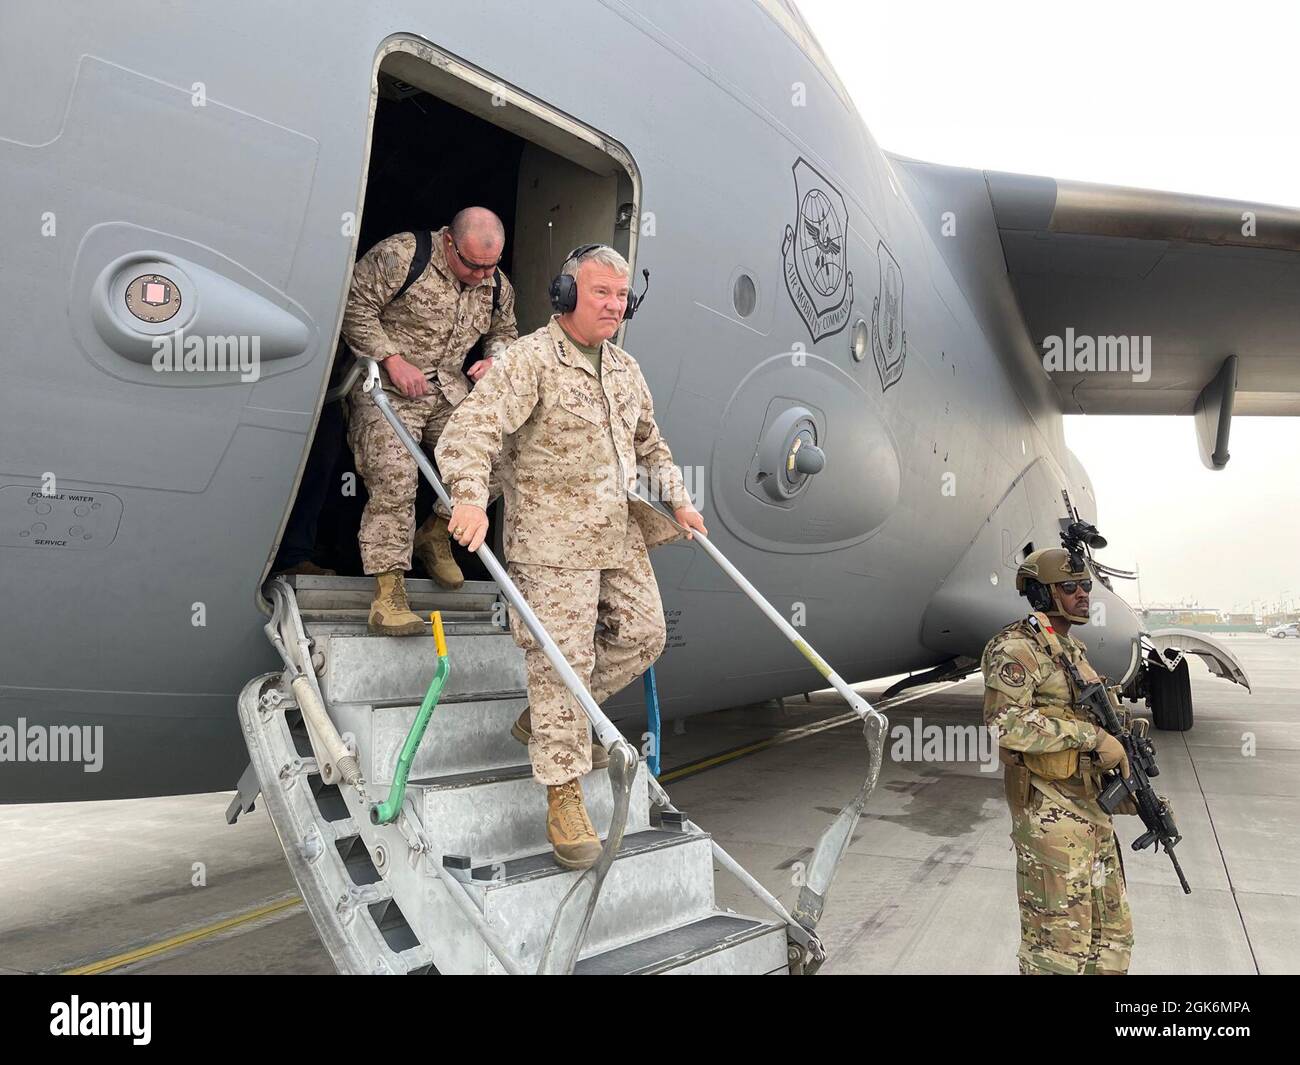 U.S. Marine Corps Gen. Frank McKenzie, the commander of U.S. Central Command, arrives at Hamid Karzai International Airport, Afghanistan on August 17, 2021. Stock Photo